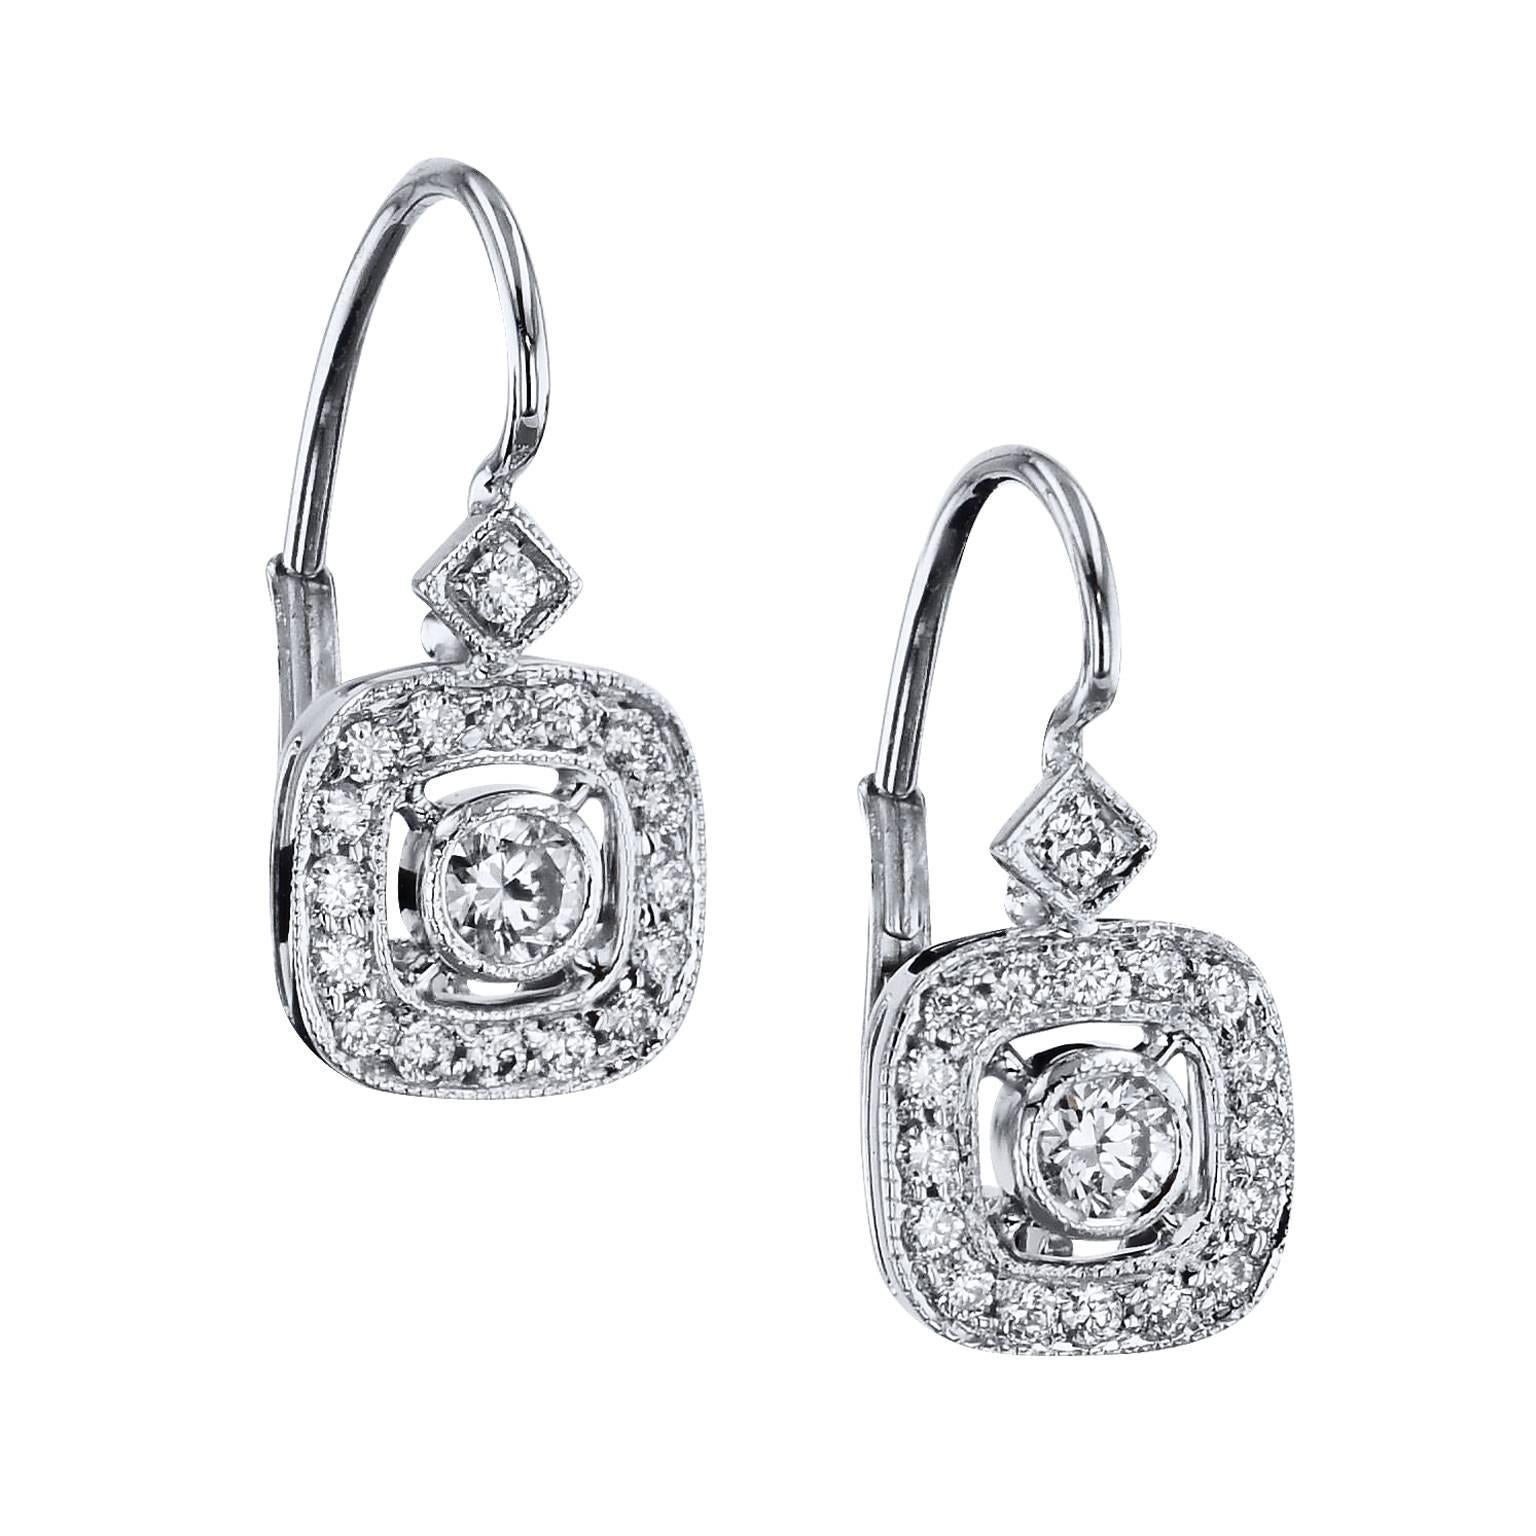 These swank handmade earrings epitomize elegance and are essential for the woman who likes a little glamour. Two diamonds with a total weight of 0.38 carat (H/I/SI1) are bezel- set with a surrounding diamond pave halo on air line. Fashioned in 18